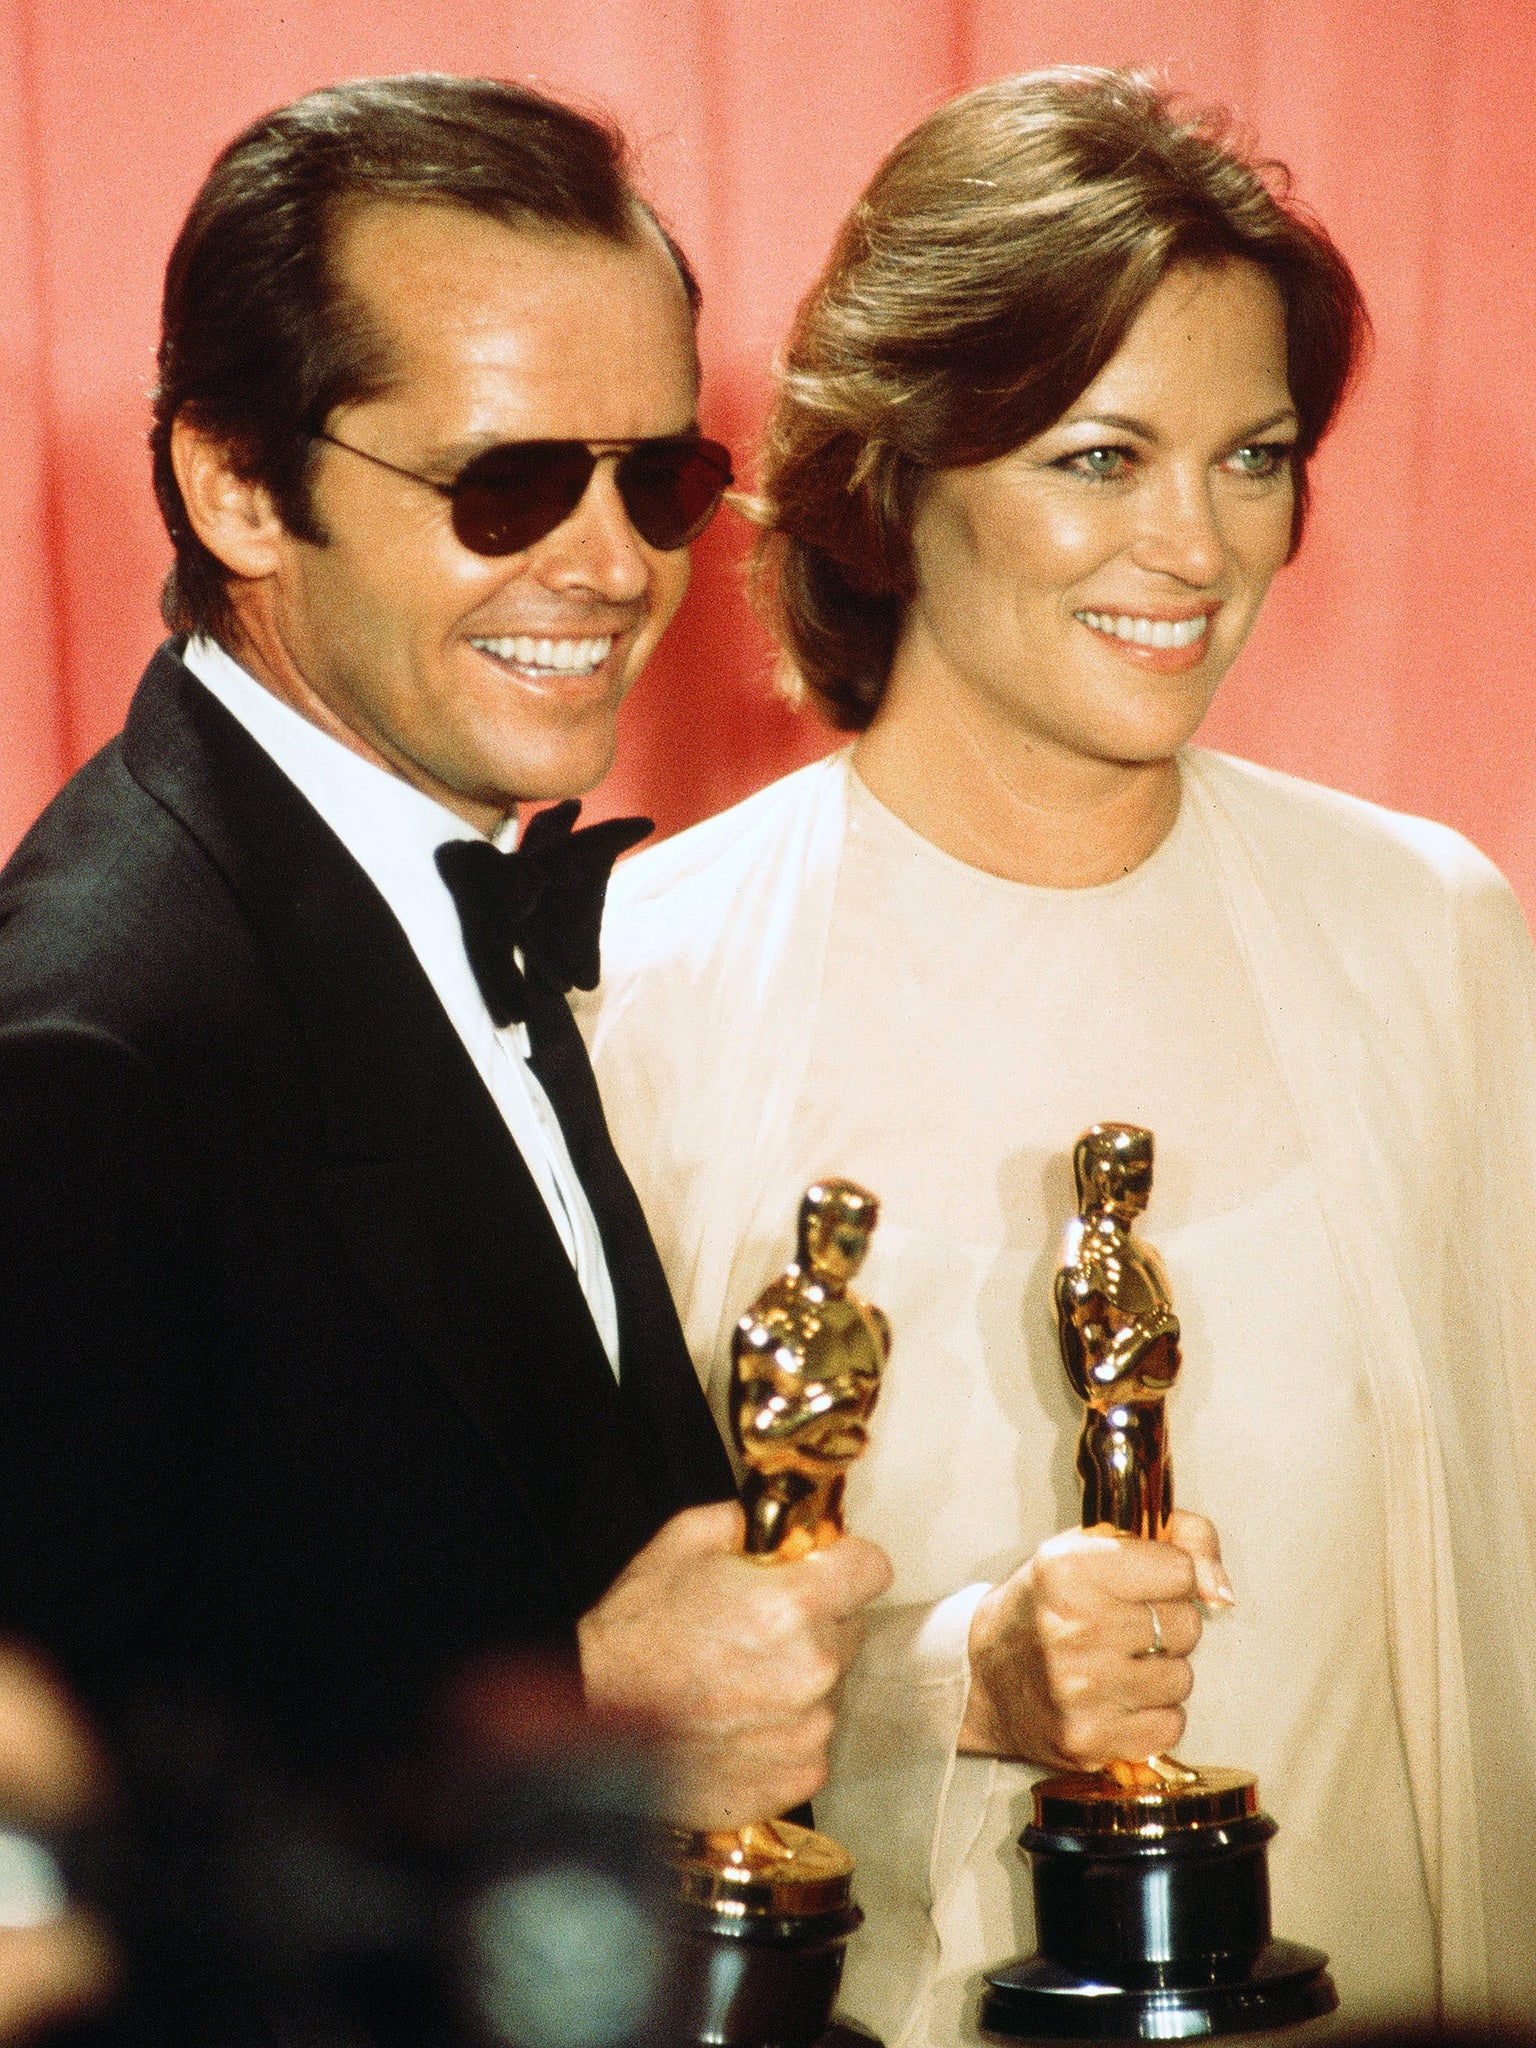 Fletcher with Jack Nicholson after winning the Best Actress Oscar at the Academy Awards in 1976